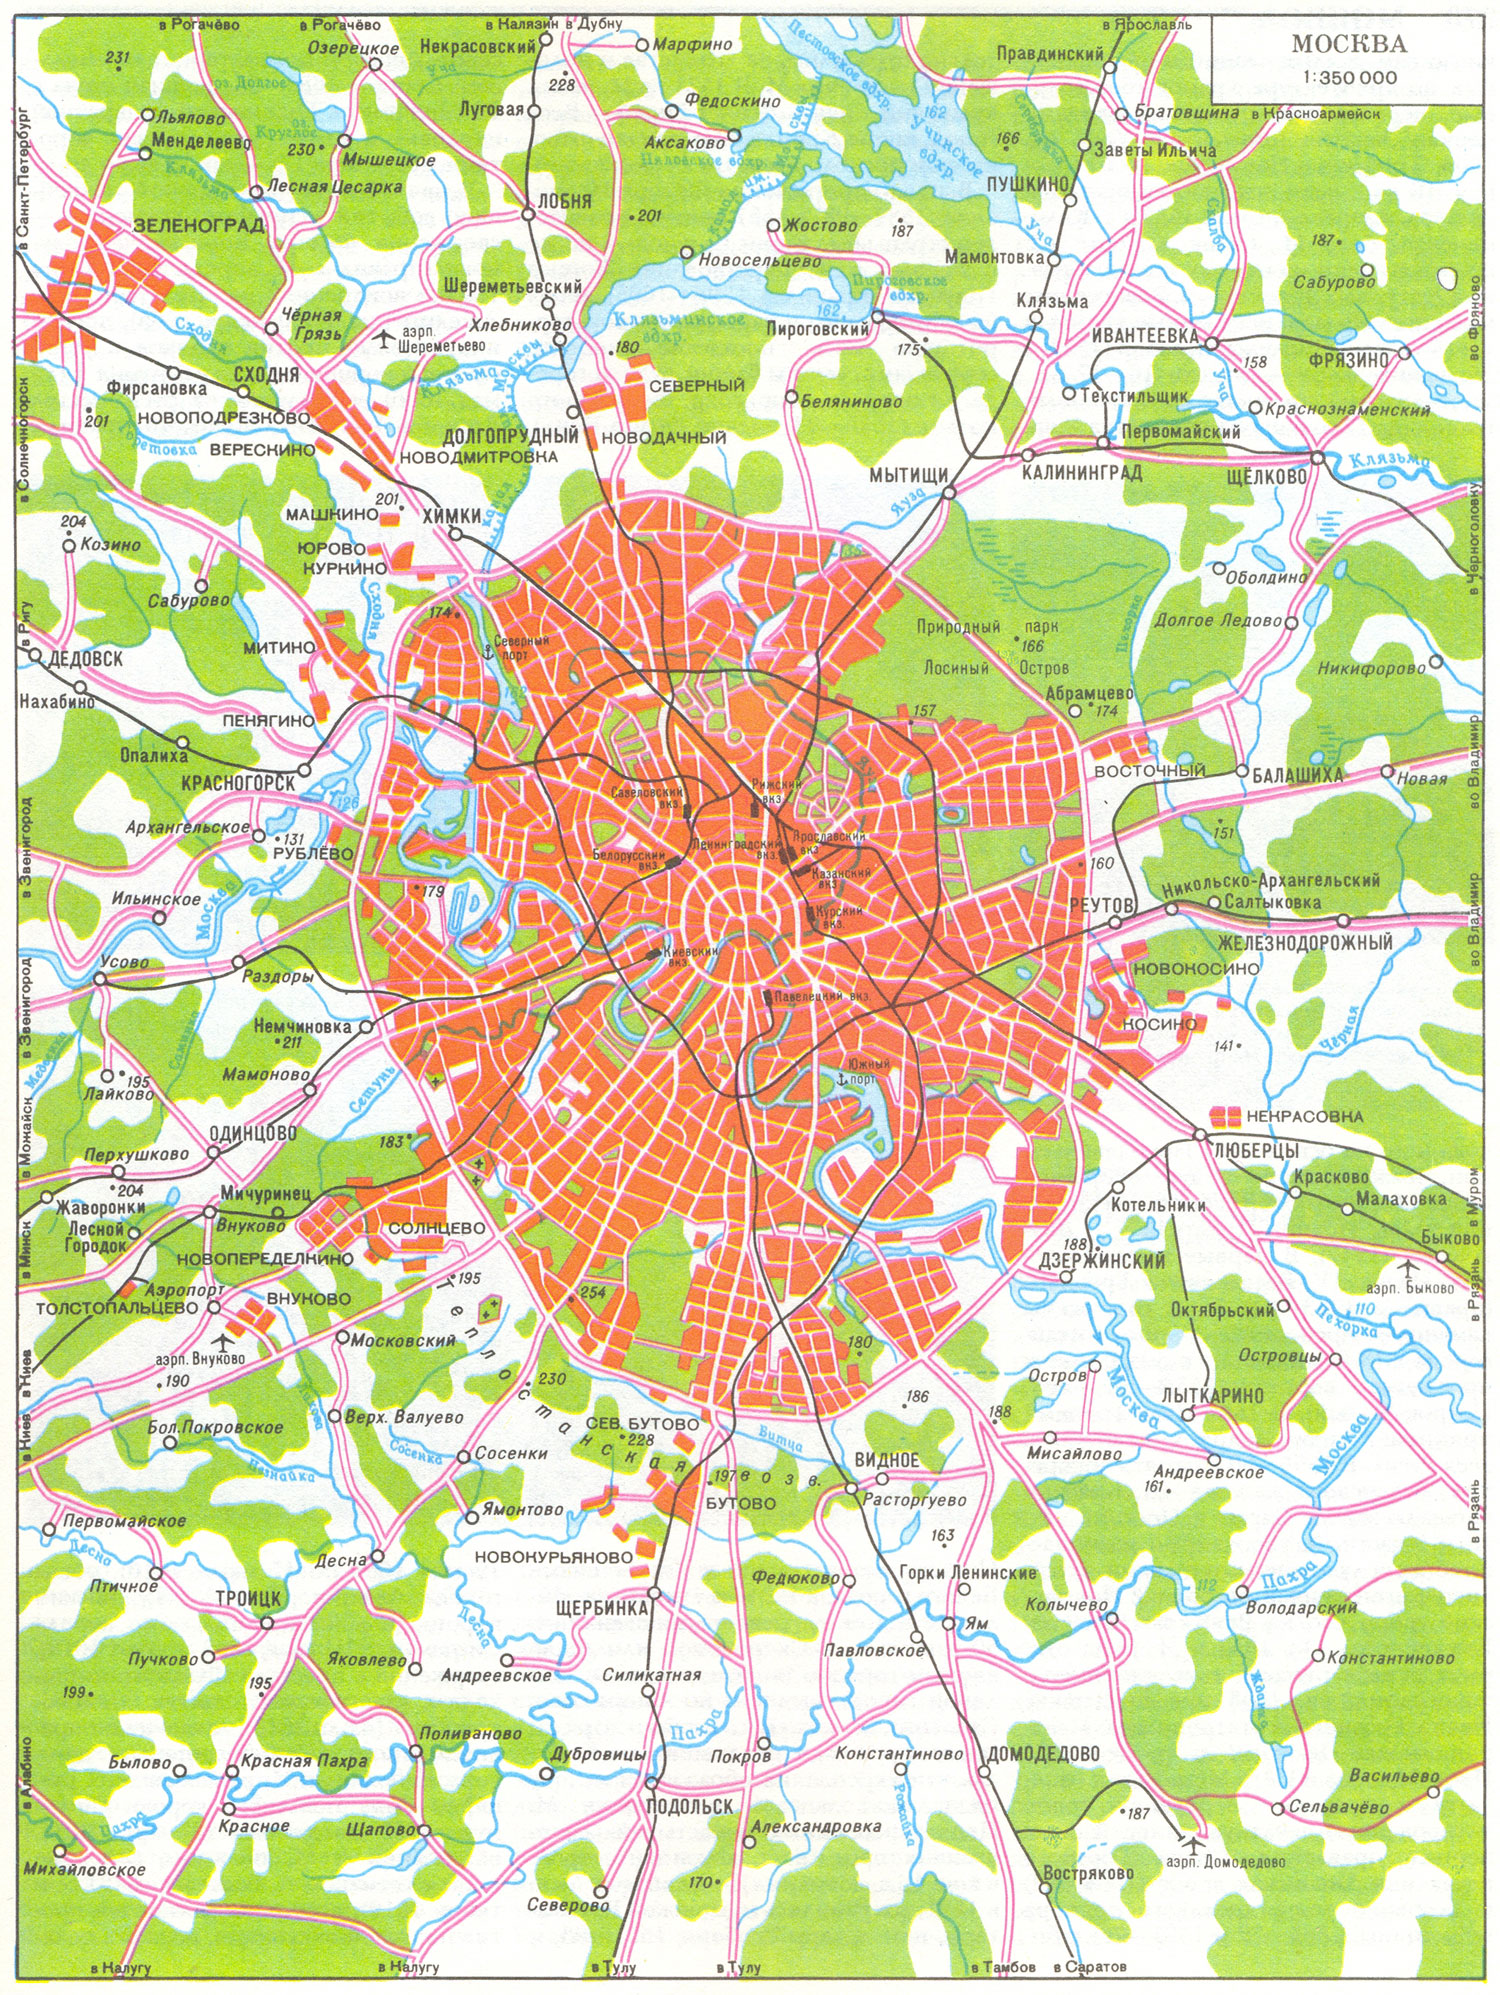 Map of suburb part of Moscow